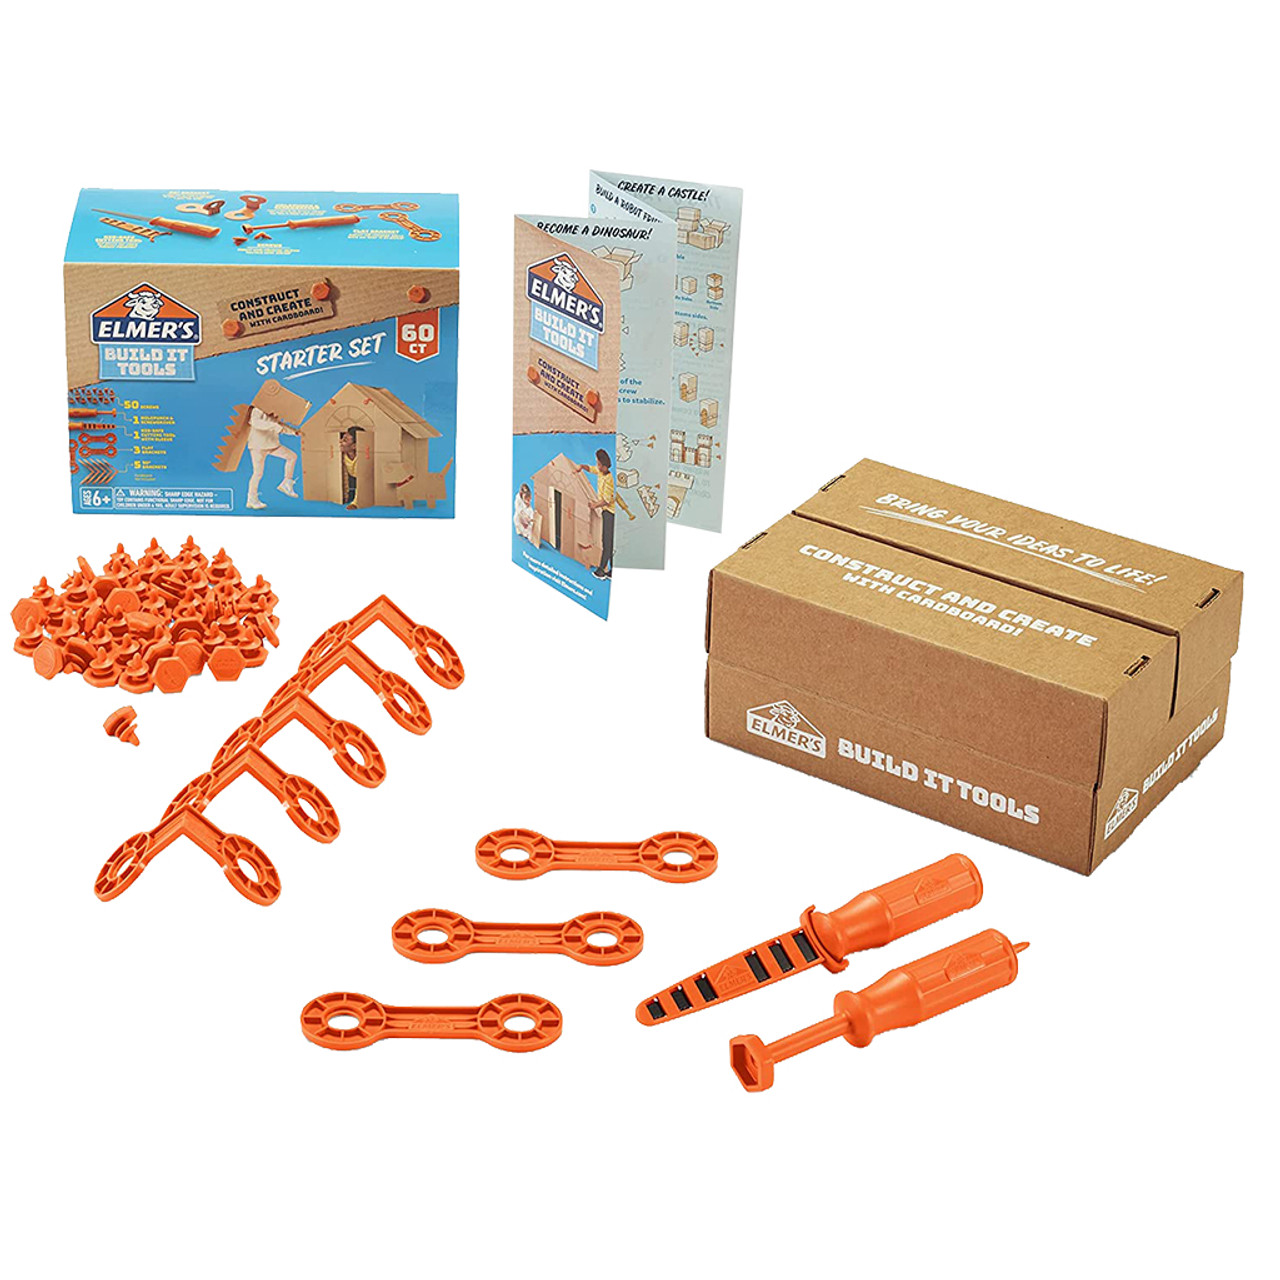 All Products  Construction tools, Cardboard box crafts, Cardboard